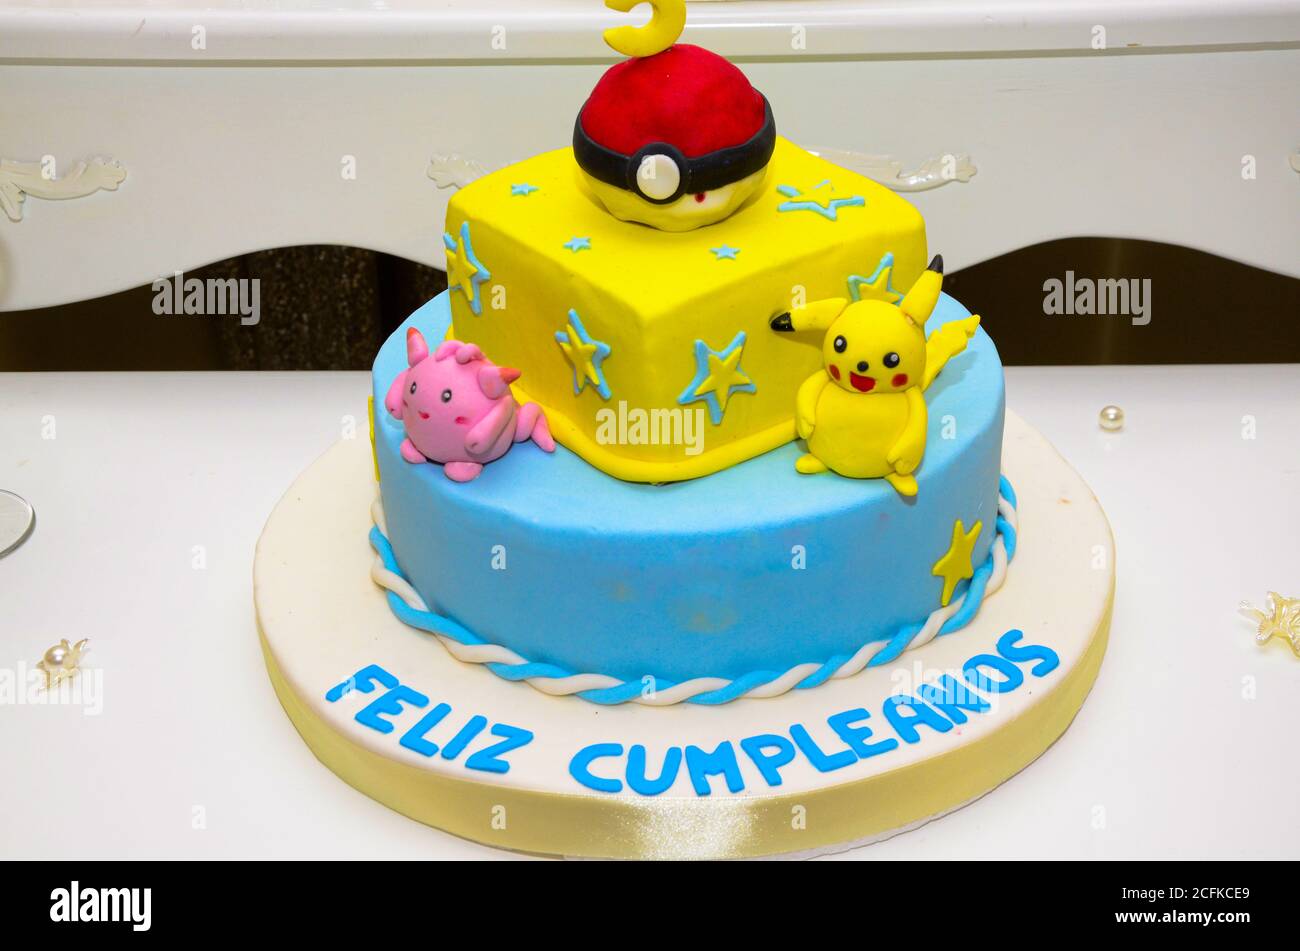 Colorful kids birthday cake decorated with yellow cartoon characters Stock  Photo - Alamy